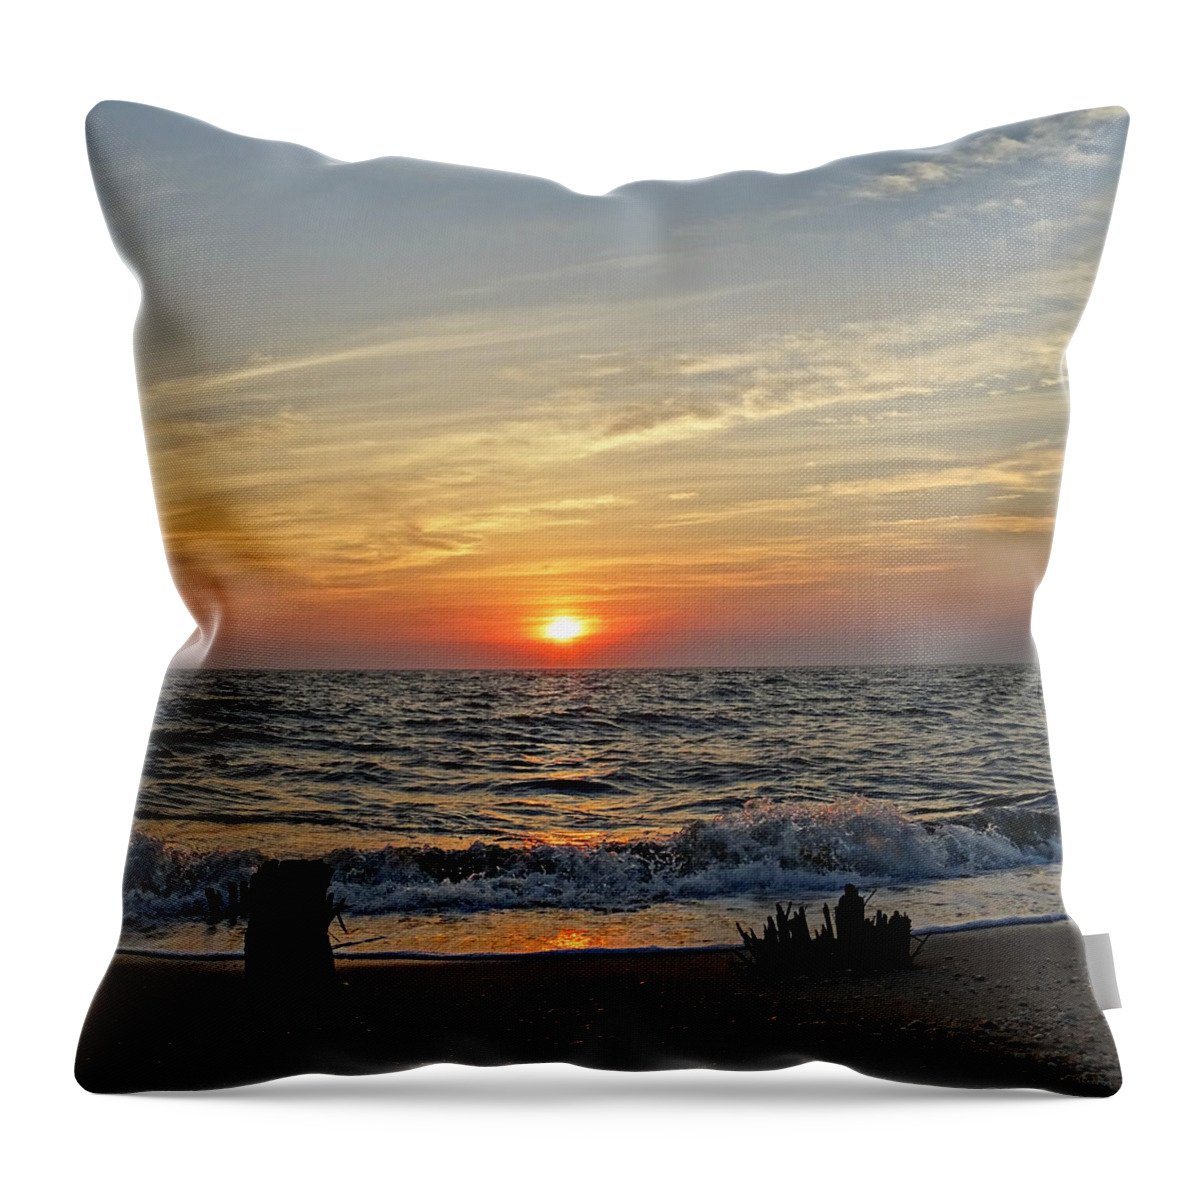 Perfection Throw Pillow featuring the photograph Perfection by Dark Whimsy